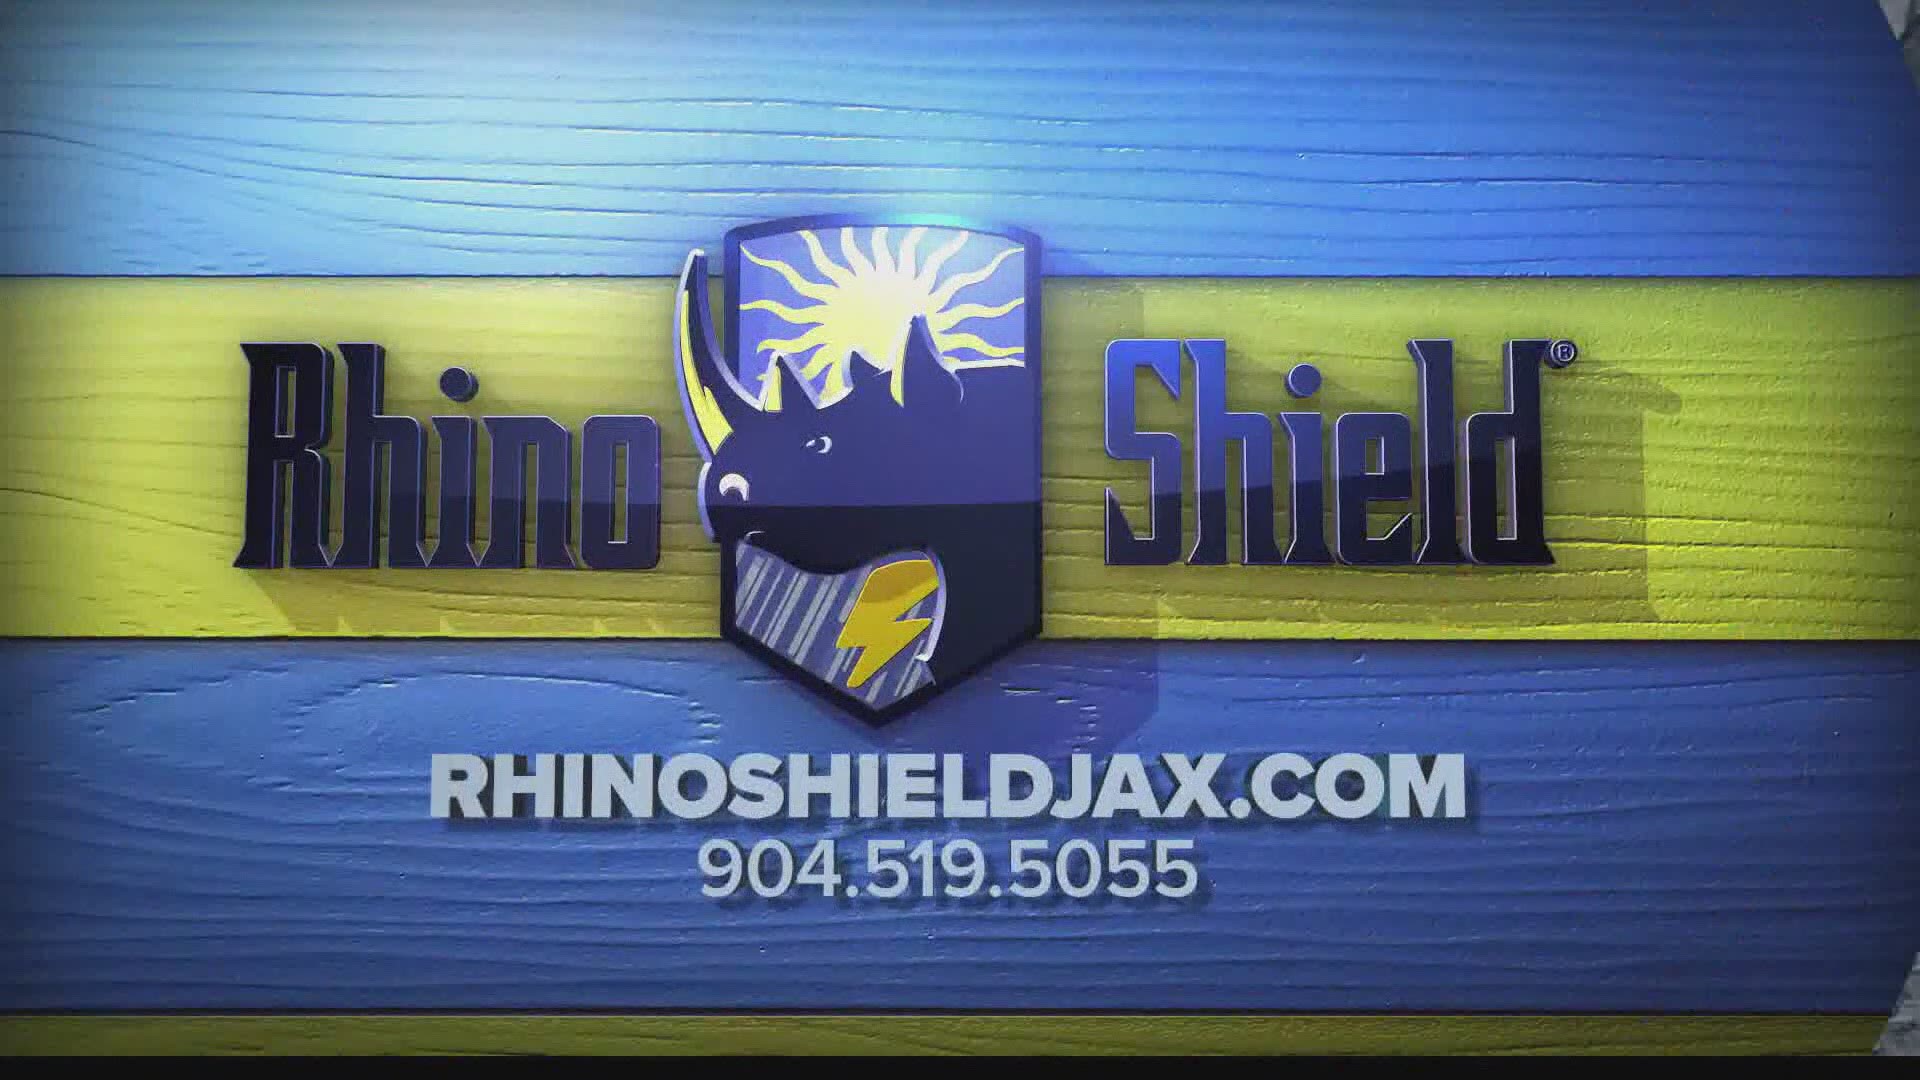 Now is the time to check out Rhino Shield and all the services they provide.